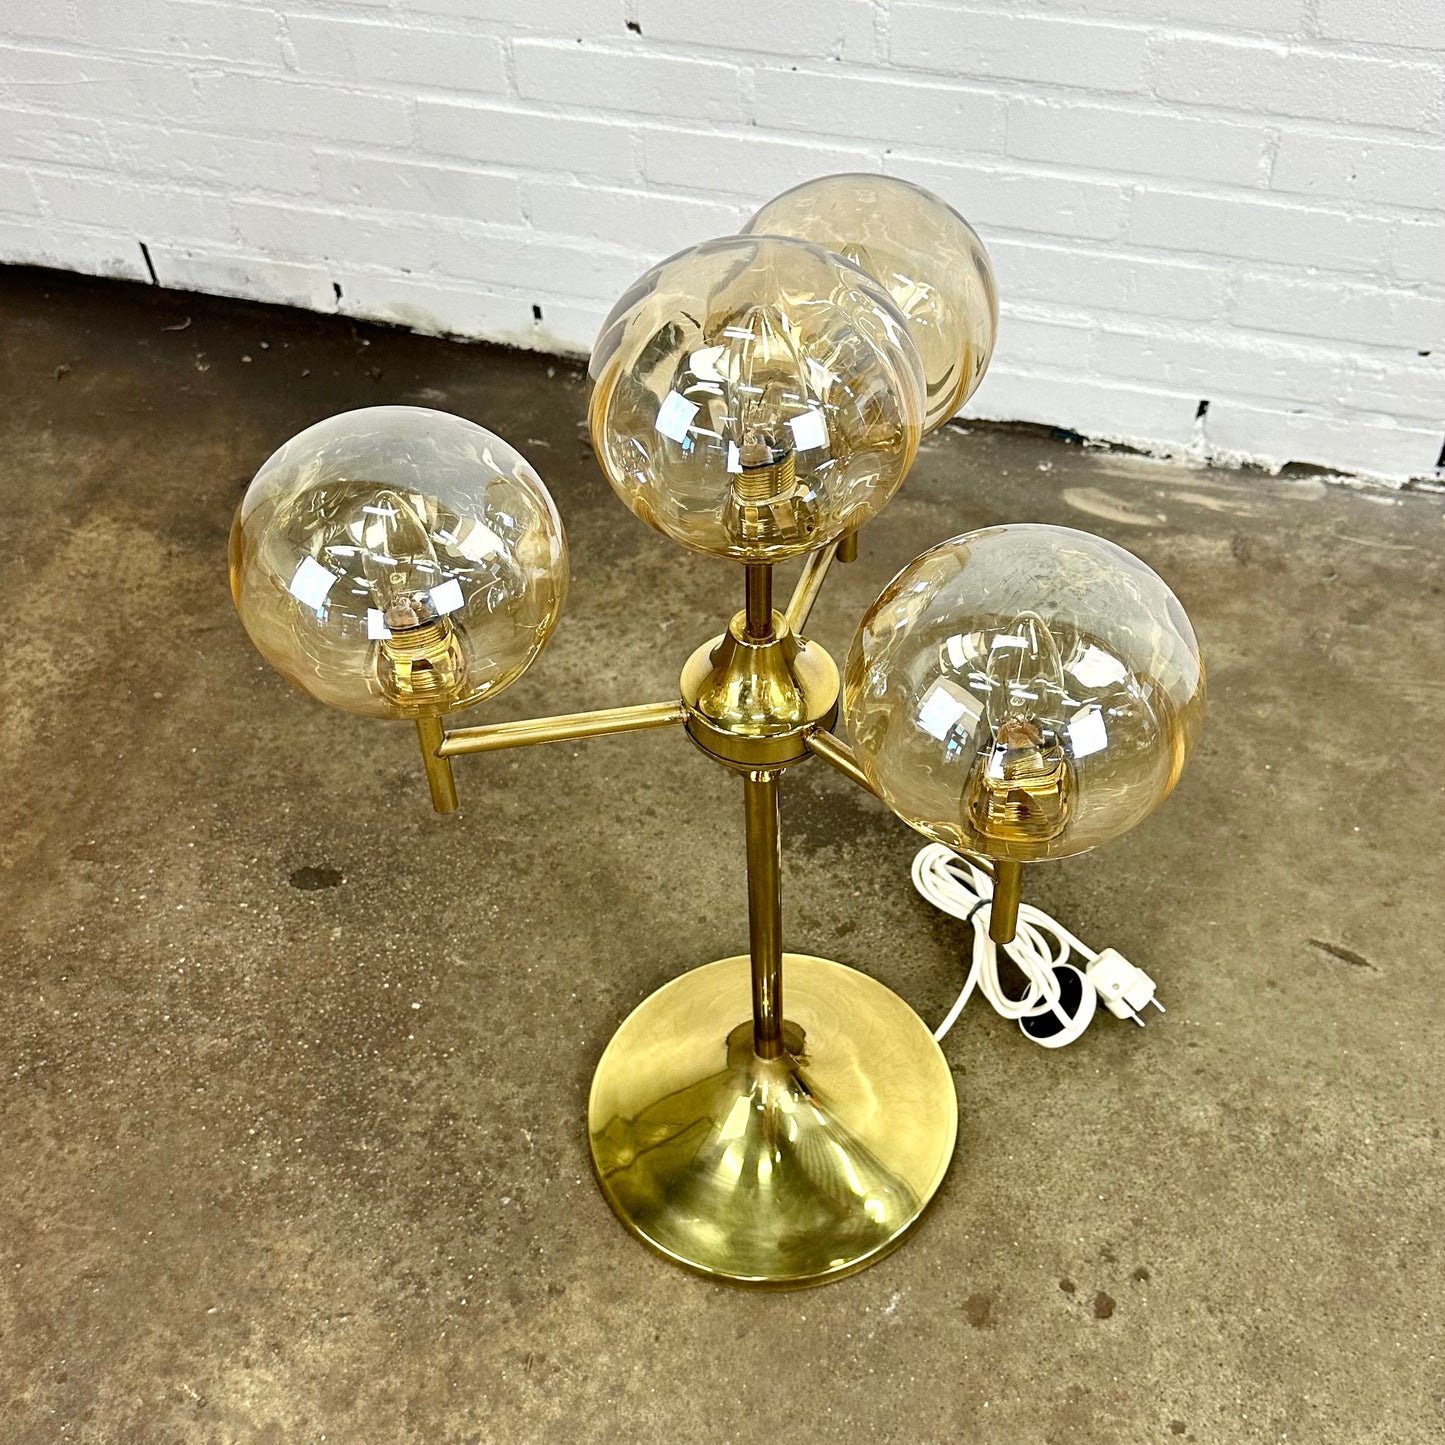 Vintage ball table lamp with brass frame